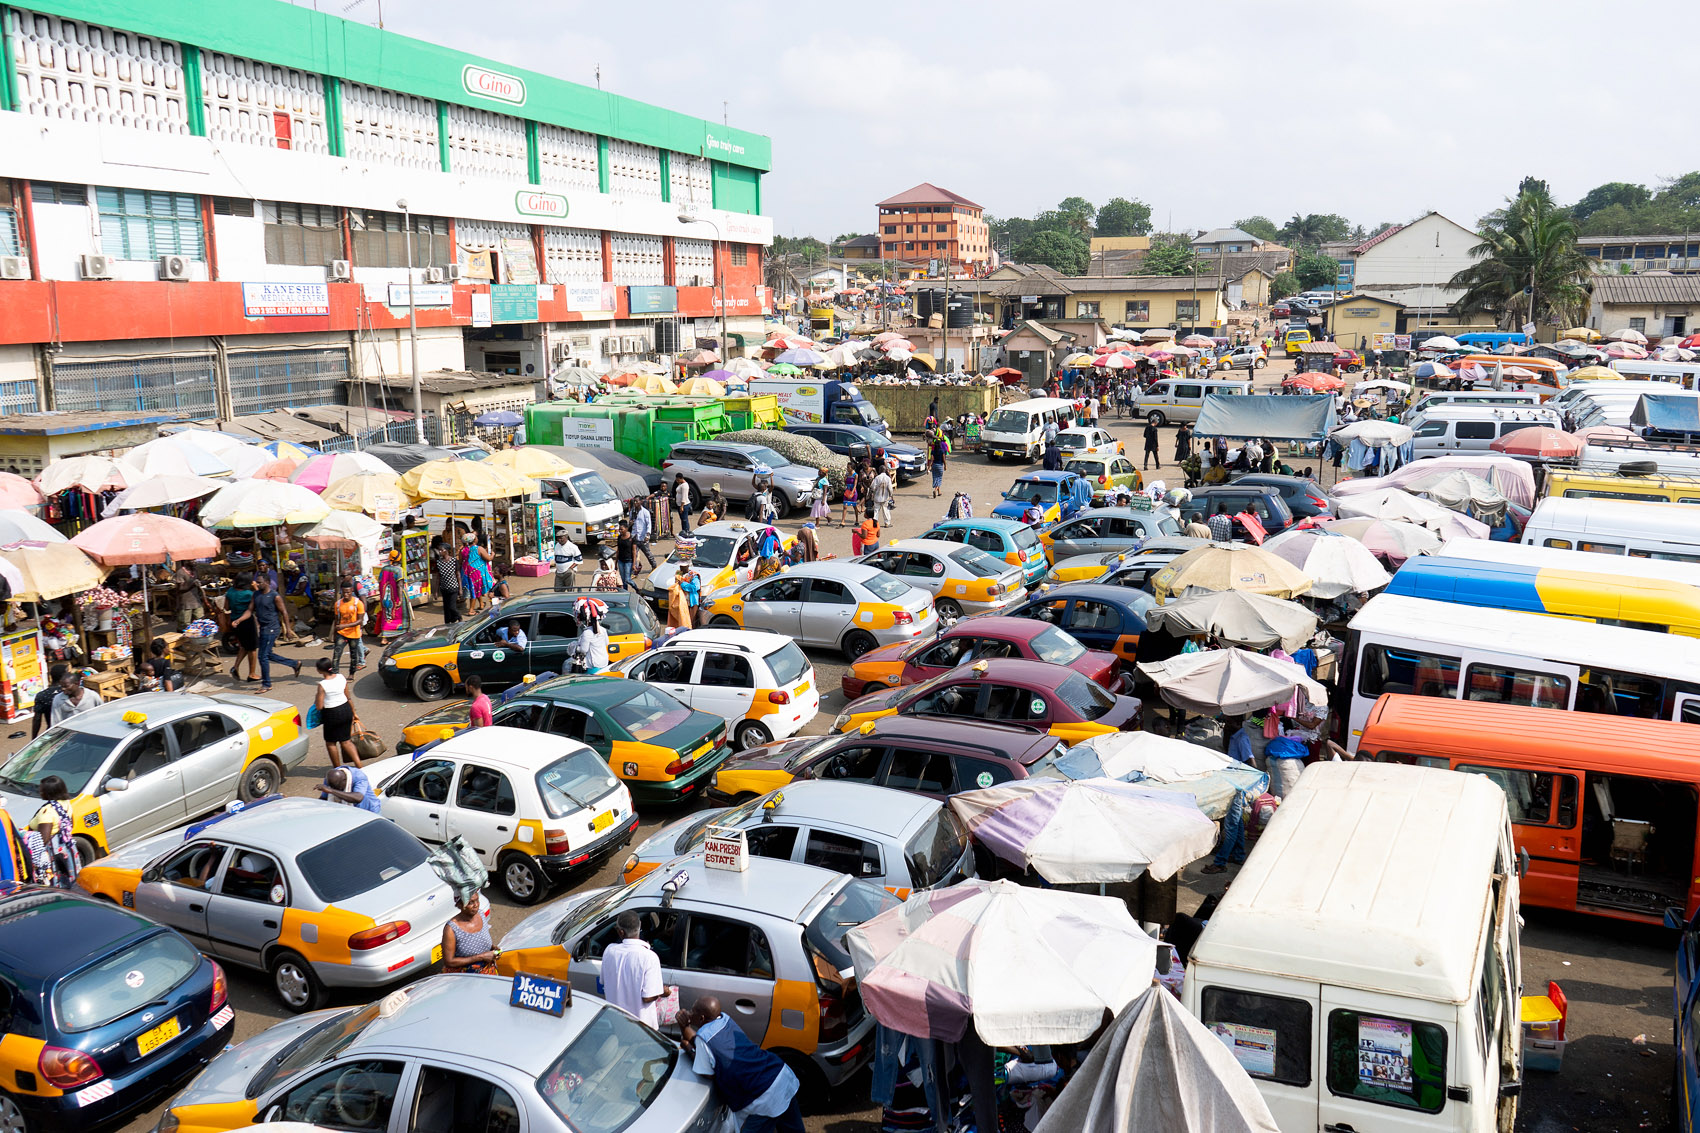 Scrap sanitation, pollution levy on petroleum products – Concerned Drivers